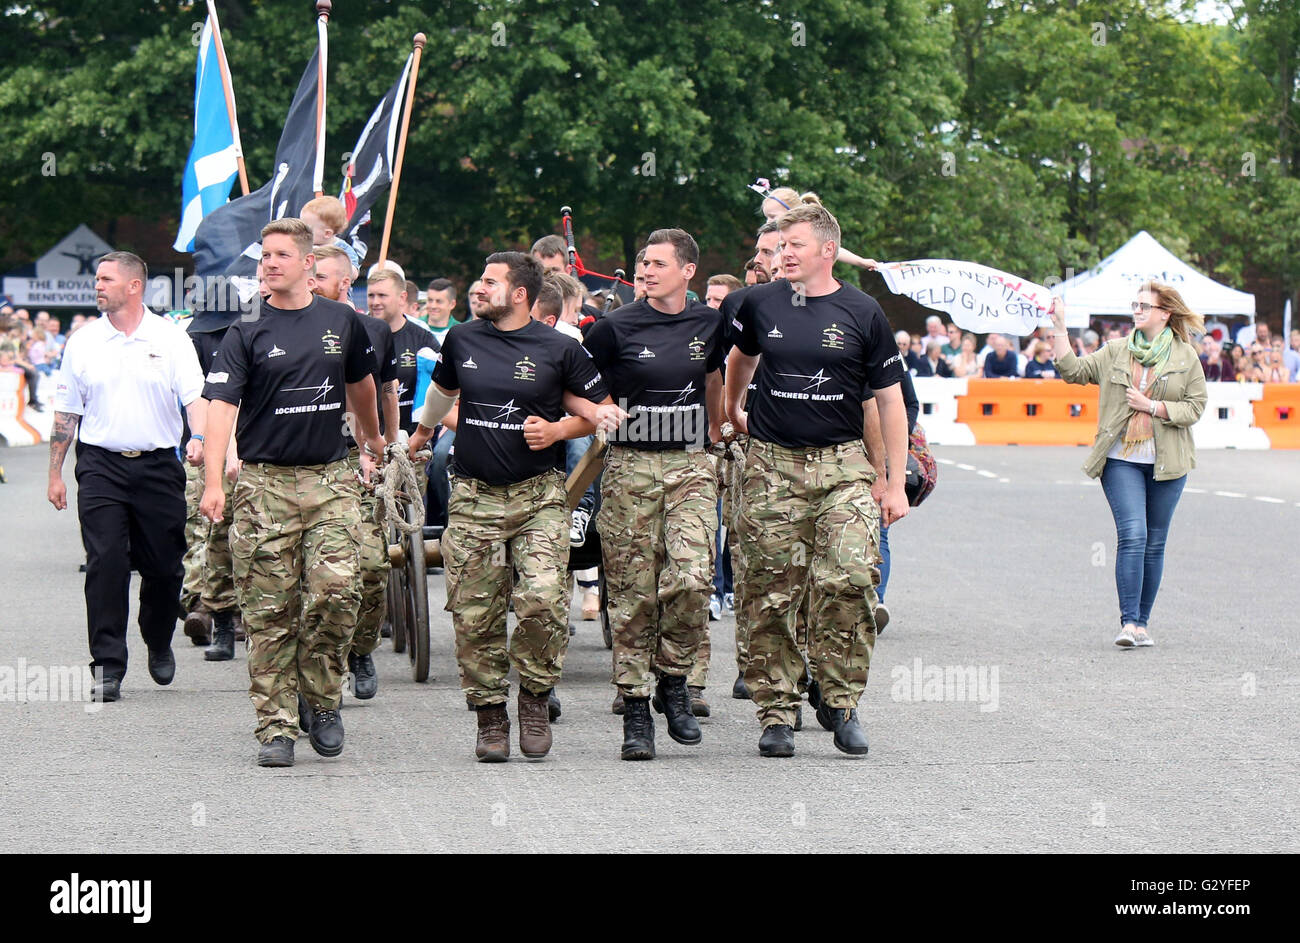 Fareham, Hampshire, UK. 4th June 2016. The most spectacular event took place at HMS Collingwood, Fareham, Hampshire when the establishment opened it gates for the annual Open Day, sponsored by 8 Wealth Management featuring the Royal Navy and Royal Marines Charity (RNRMC) Field Gun Competition. The Field Gun competition featured crews from across the UK and as far afield as Gibraltar competing for the coveted Brickwoods Trophy. Credit:  uknip/Alamy Live News Stock Photo